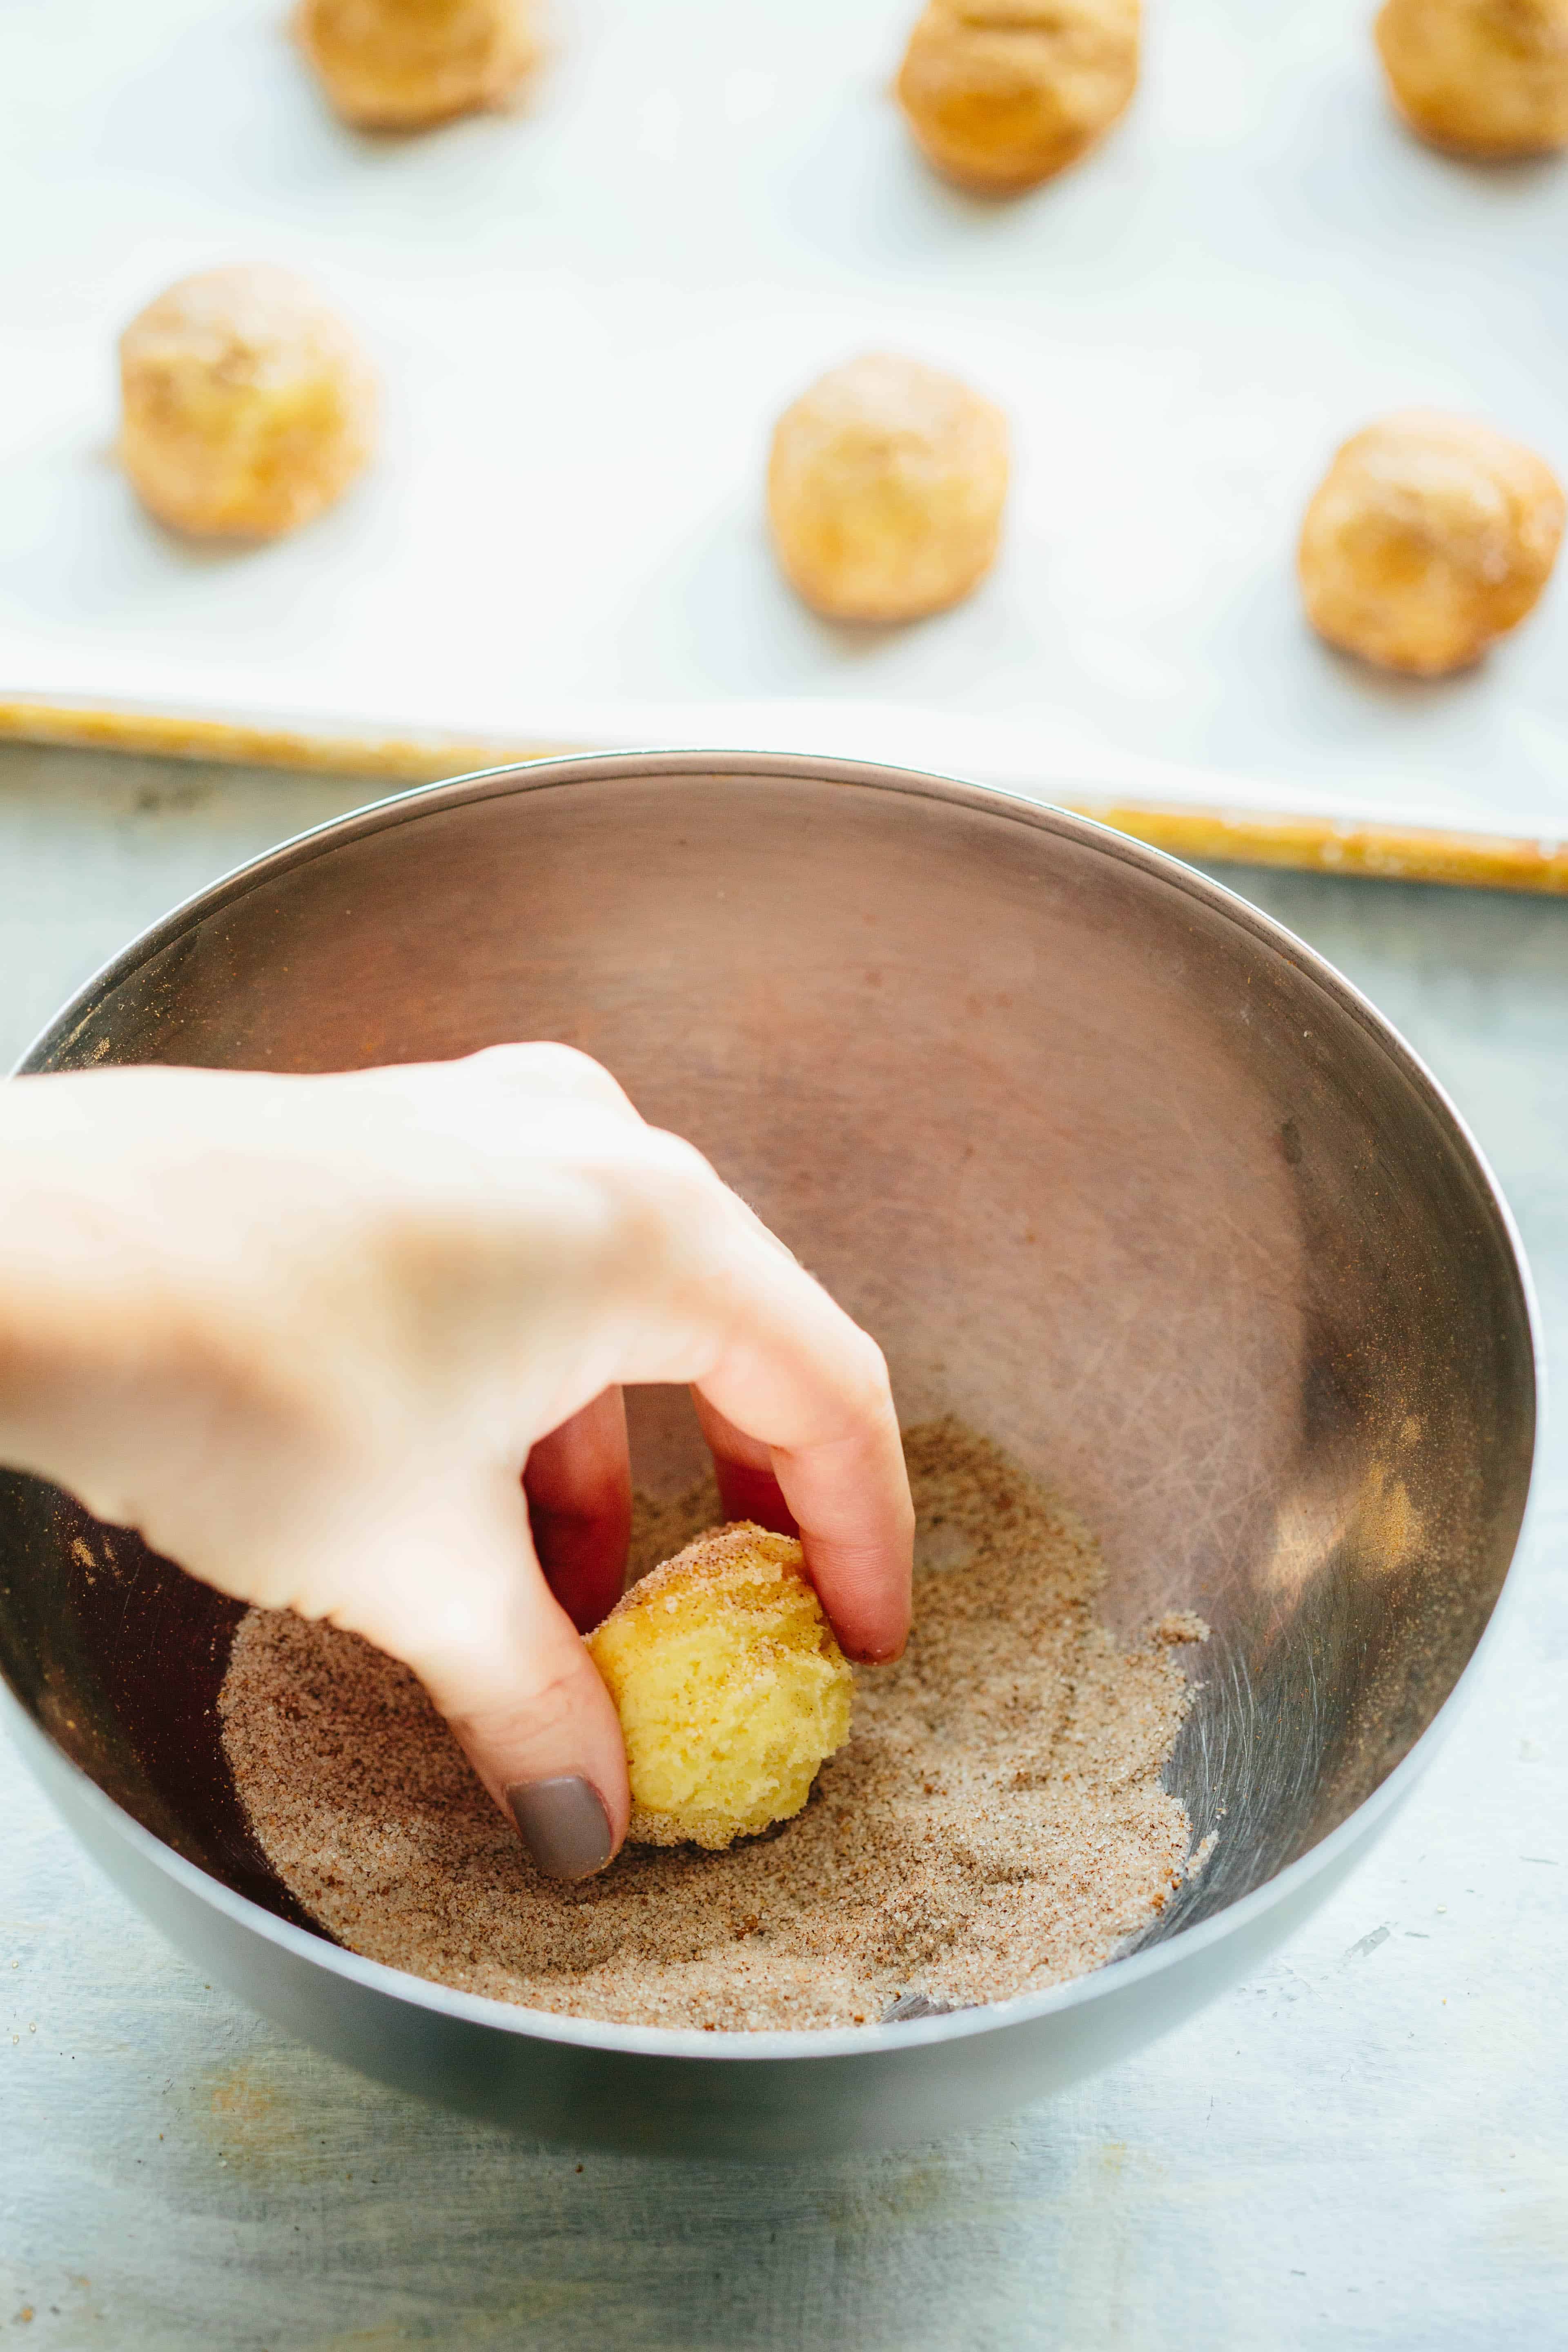 A hand rolling a ball of snickerdoodle dough in a bowl of cinnamon sugar.